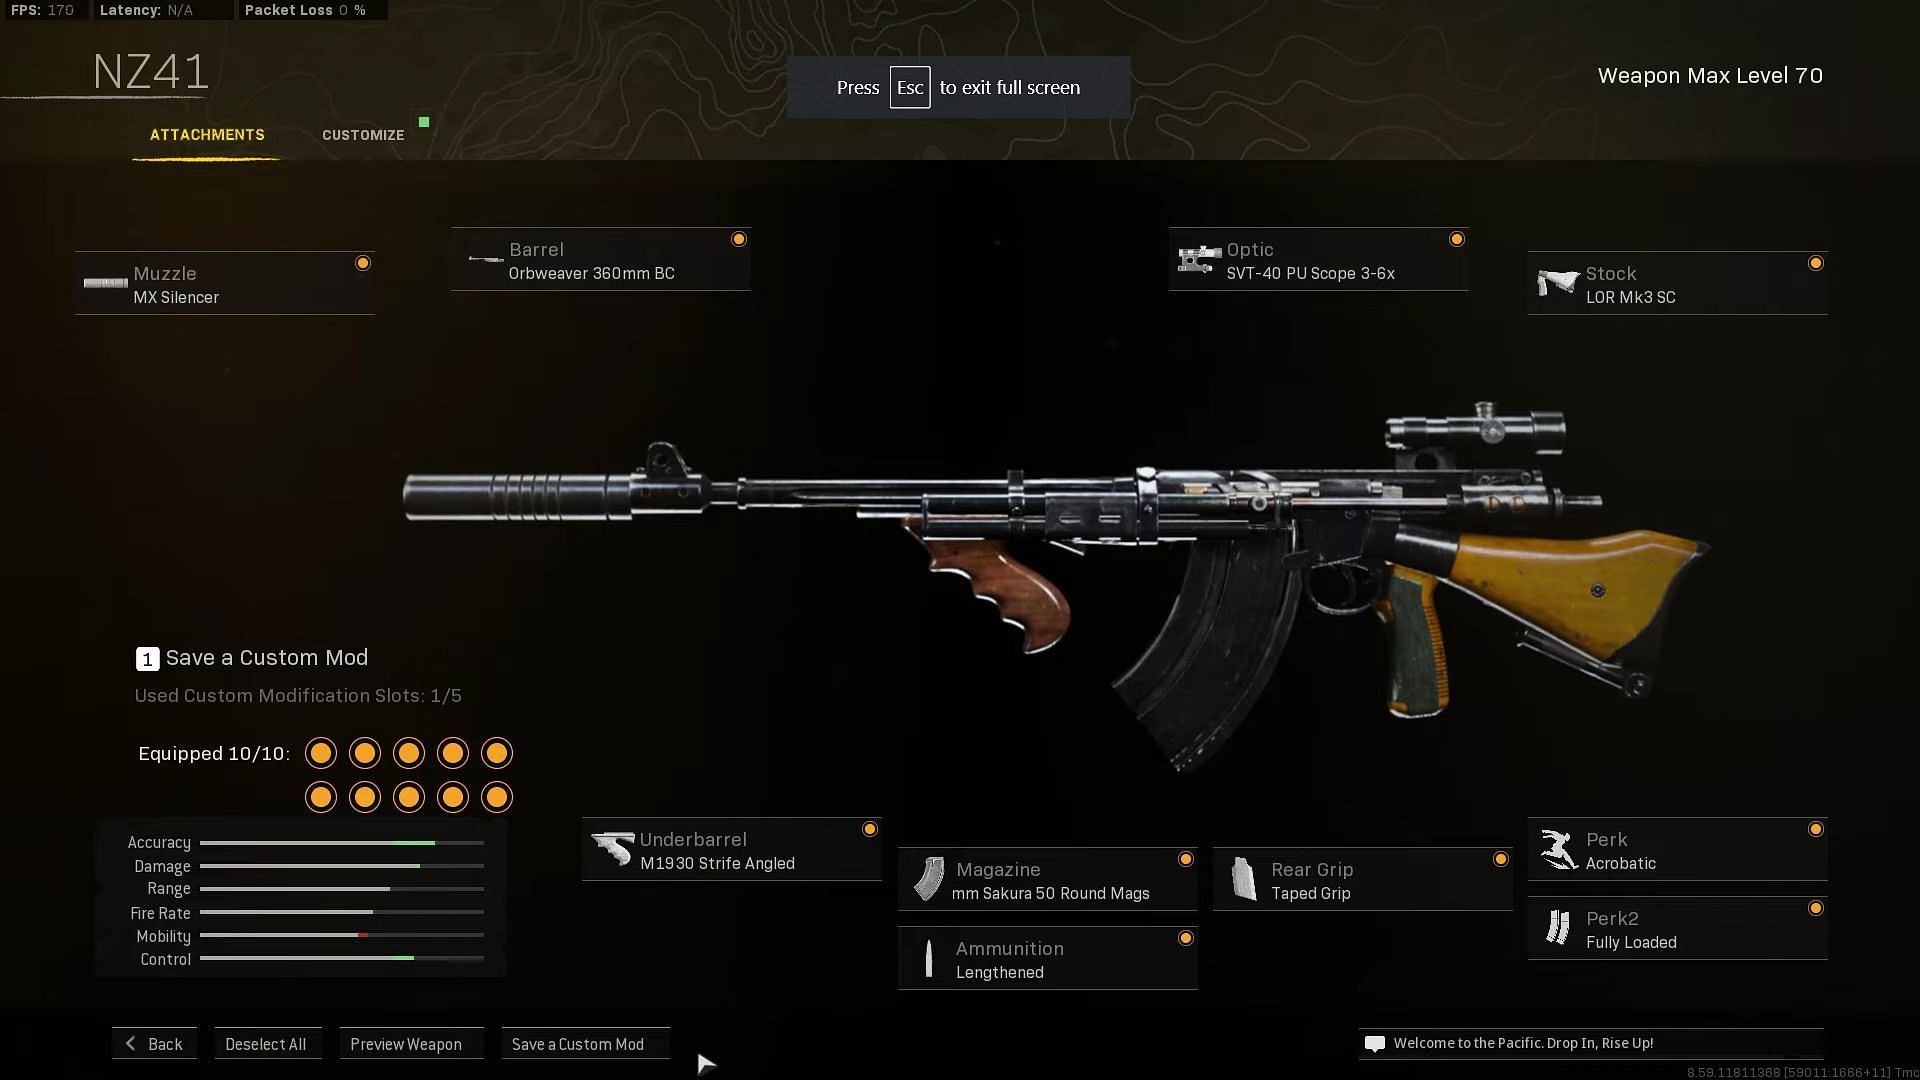 Call of Duty Warzone&#039;s NZ-41 (Image via AlwaysGhost/YouTube)